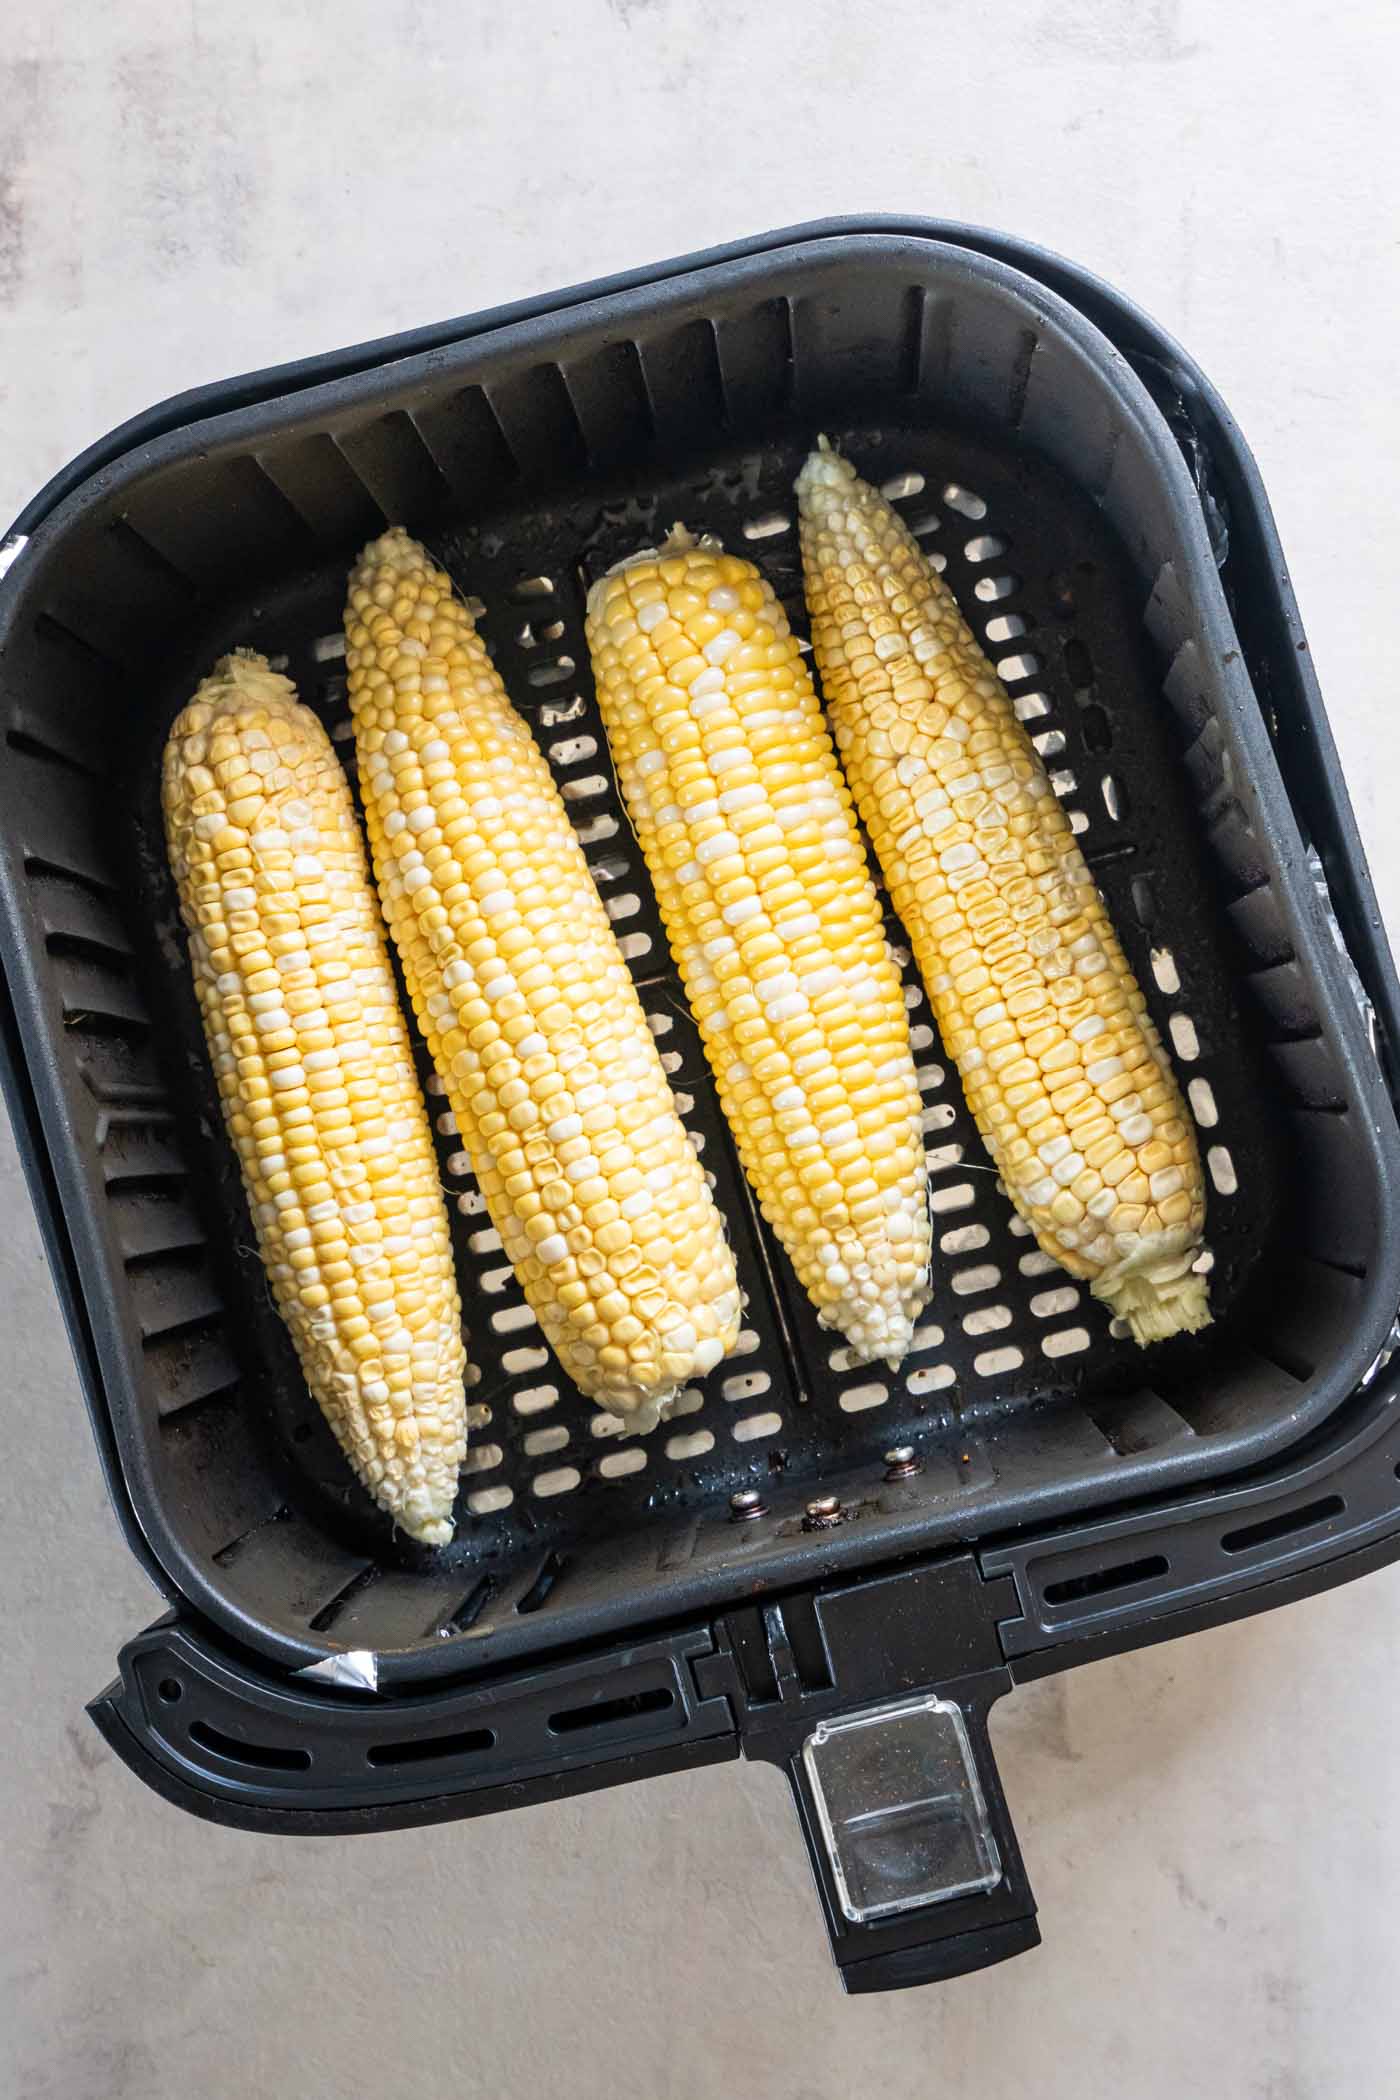 Four uncooked cobs of corn in air fryer basket.